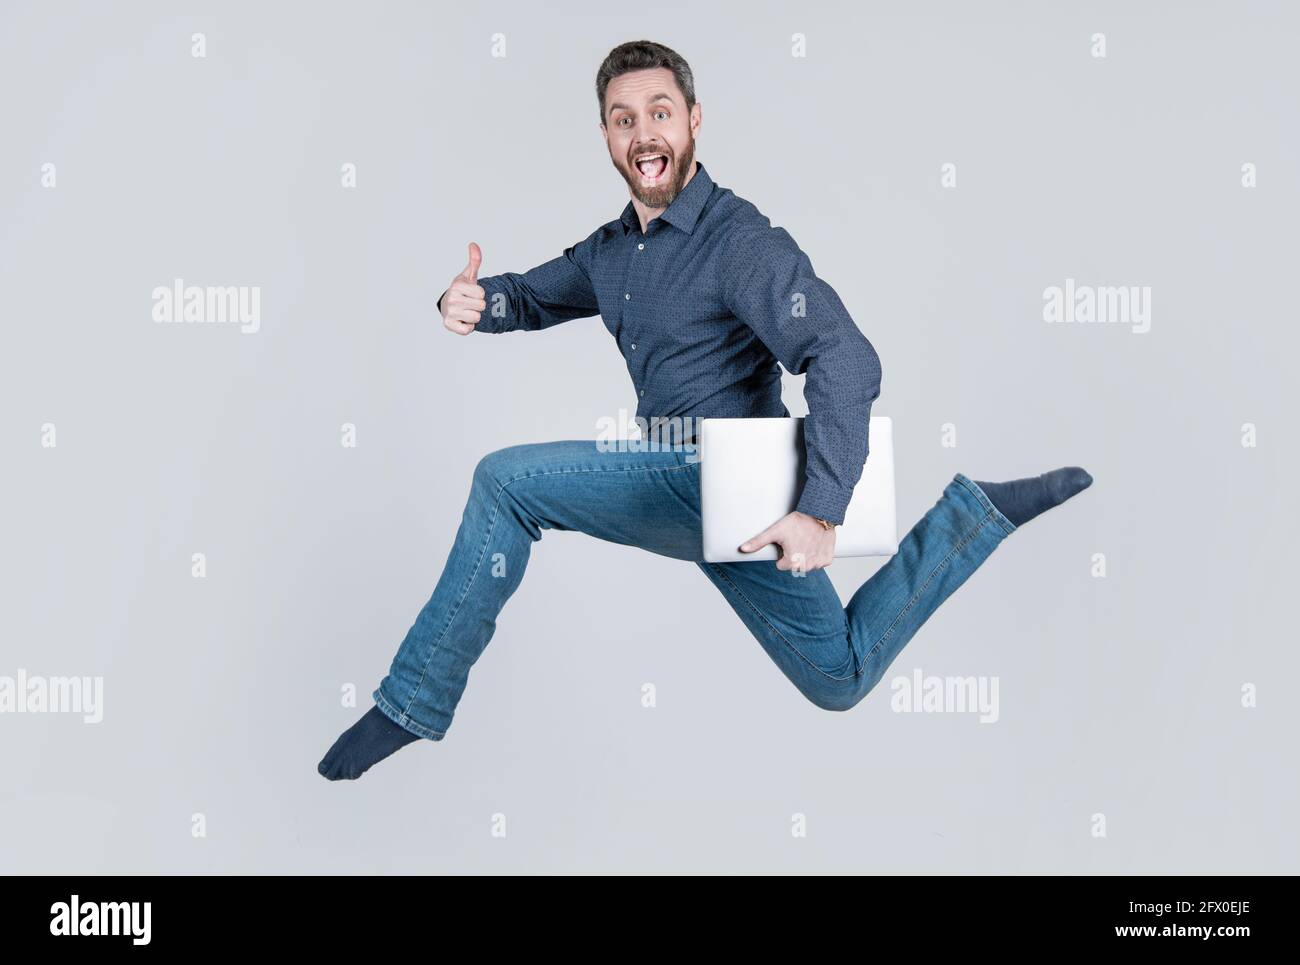 jumping man running while working online on laptop hurry up for shopping show thumb up, success. Stock Photo